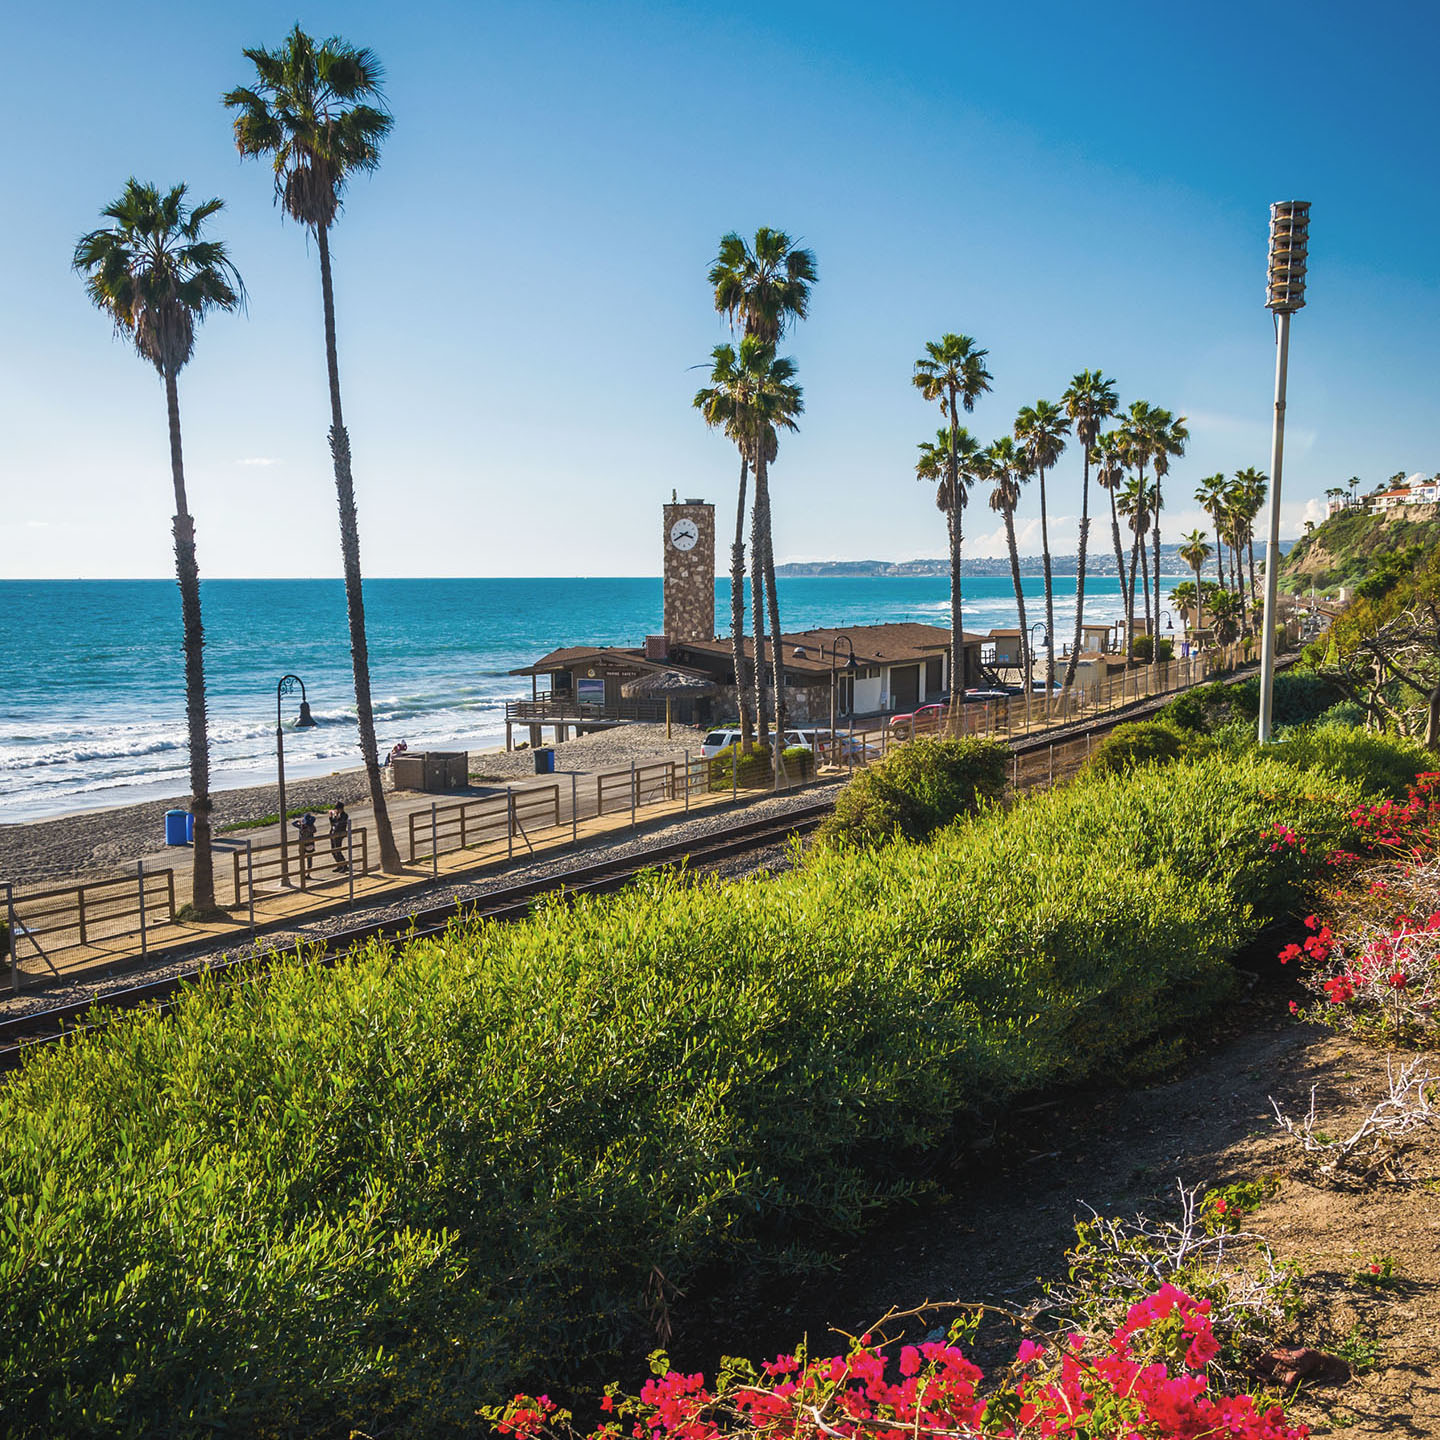 Flowers and view of the beach in San Clemente, California.